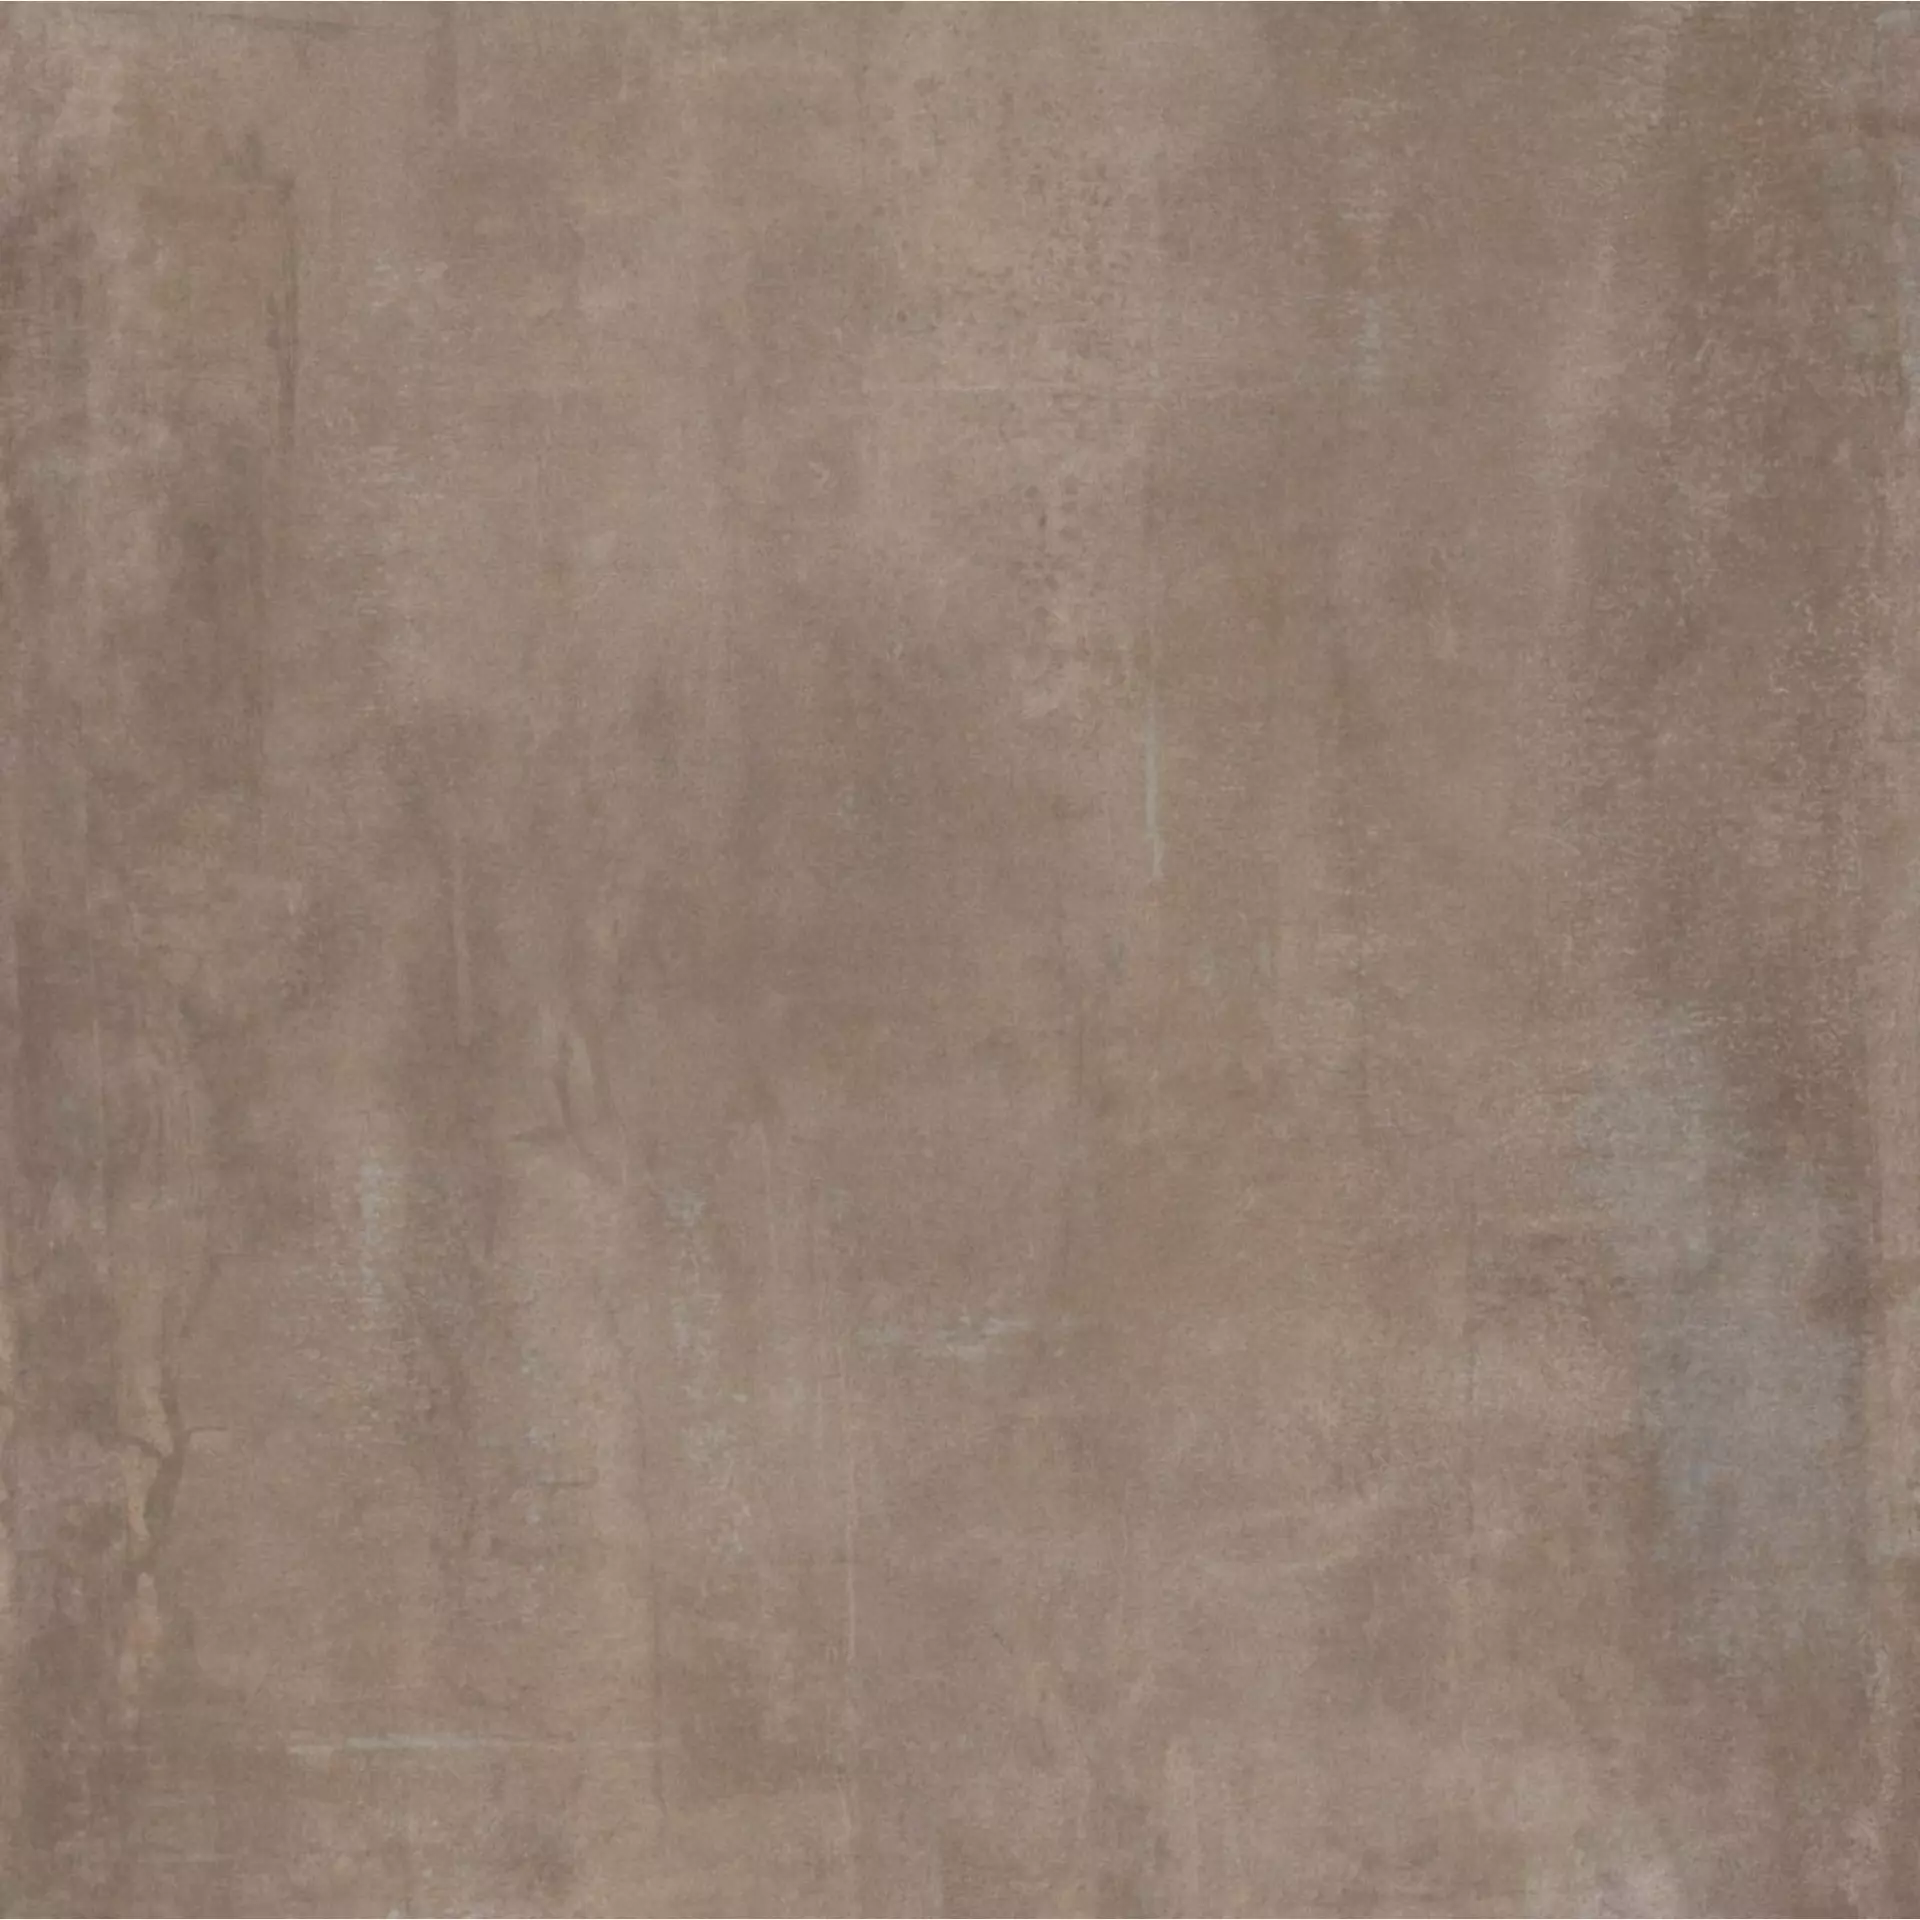 ABK Interno9 Mud Naturale I9R01250 60x60cm rectified 8,5mm